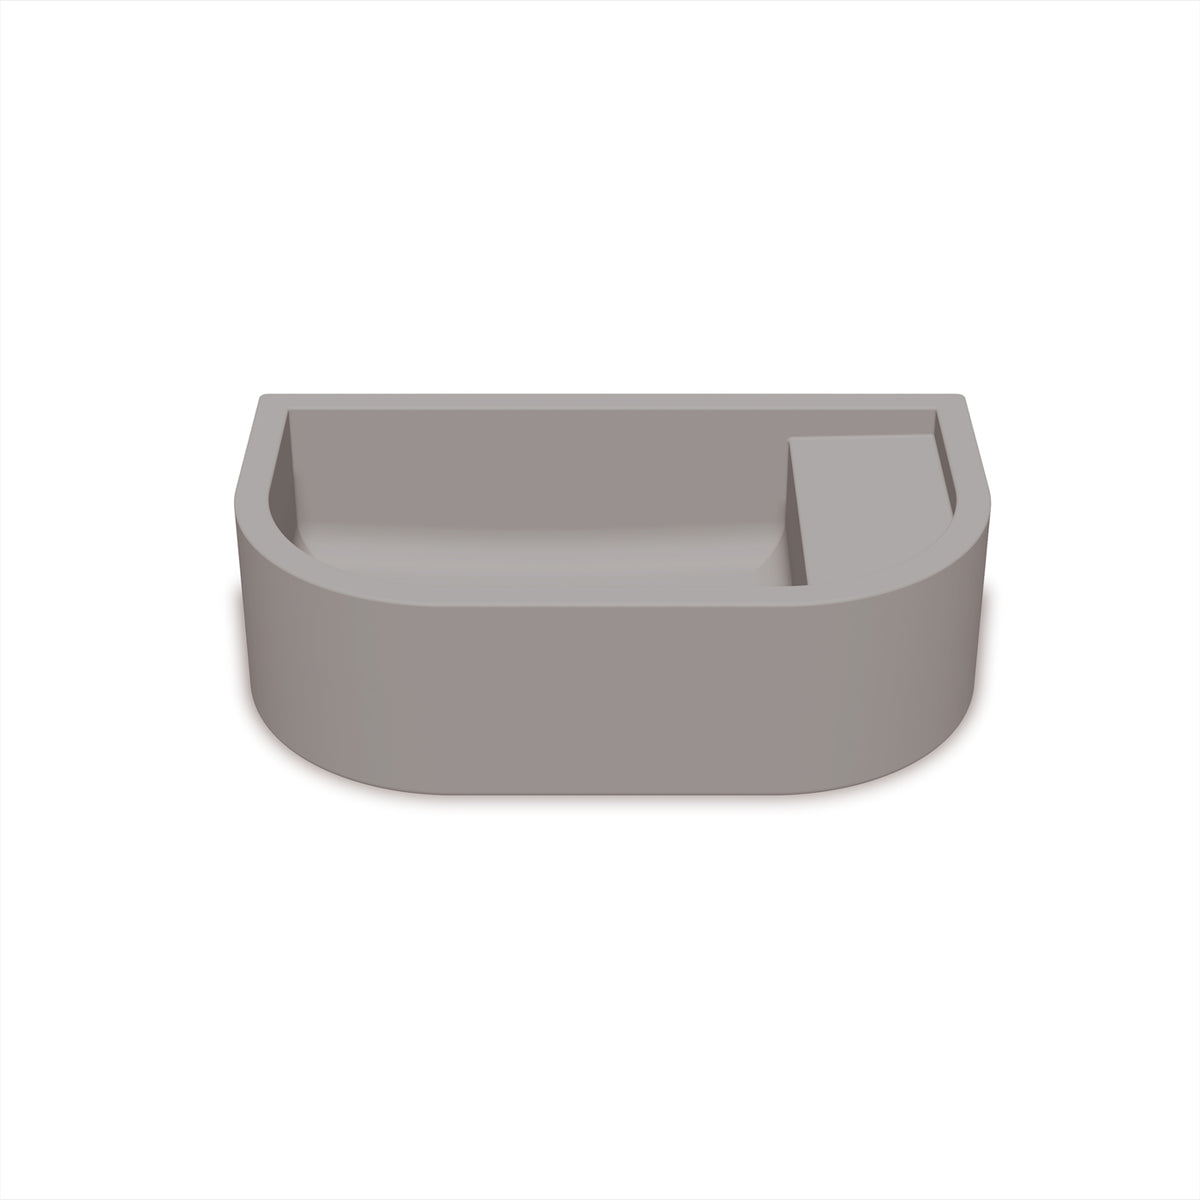 Loop 01 Basin - Overflow - Wall Hung (Sky Grey,No Tap Hole,White)